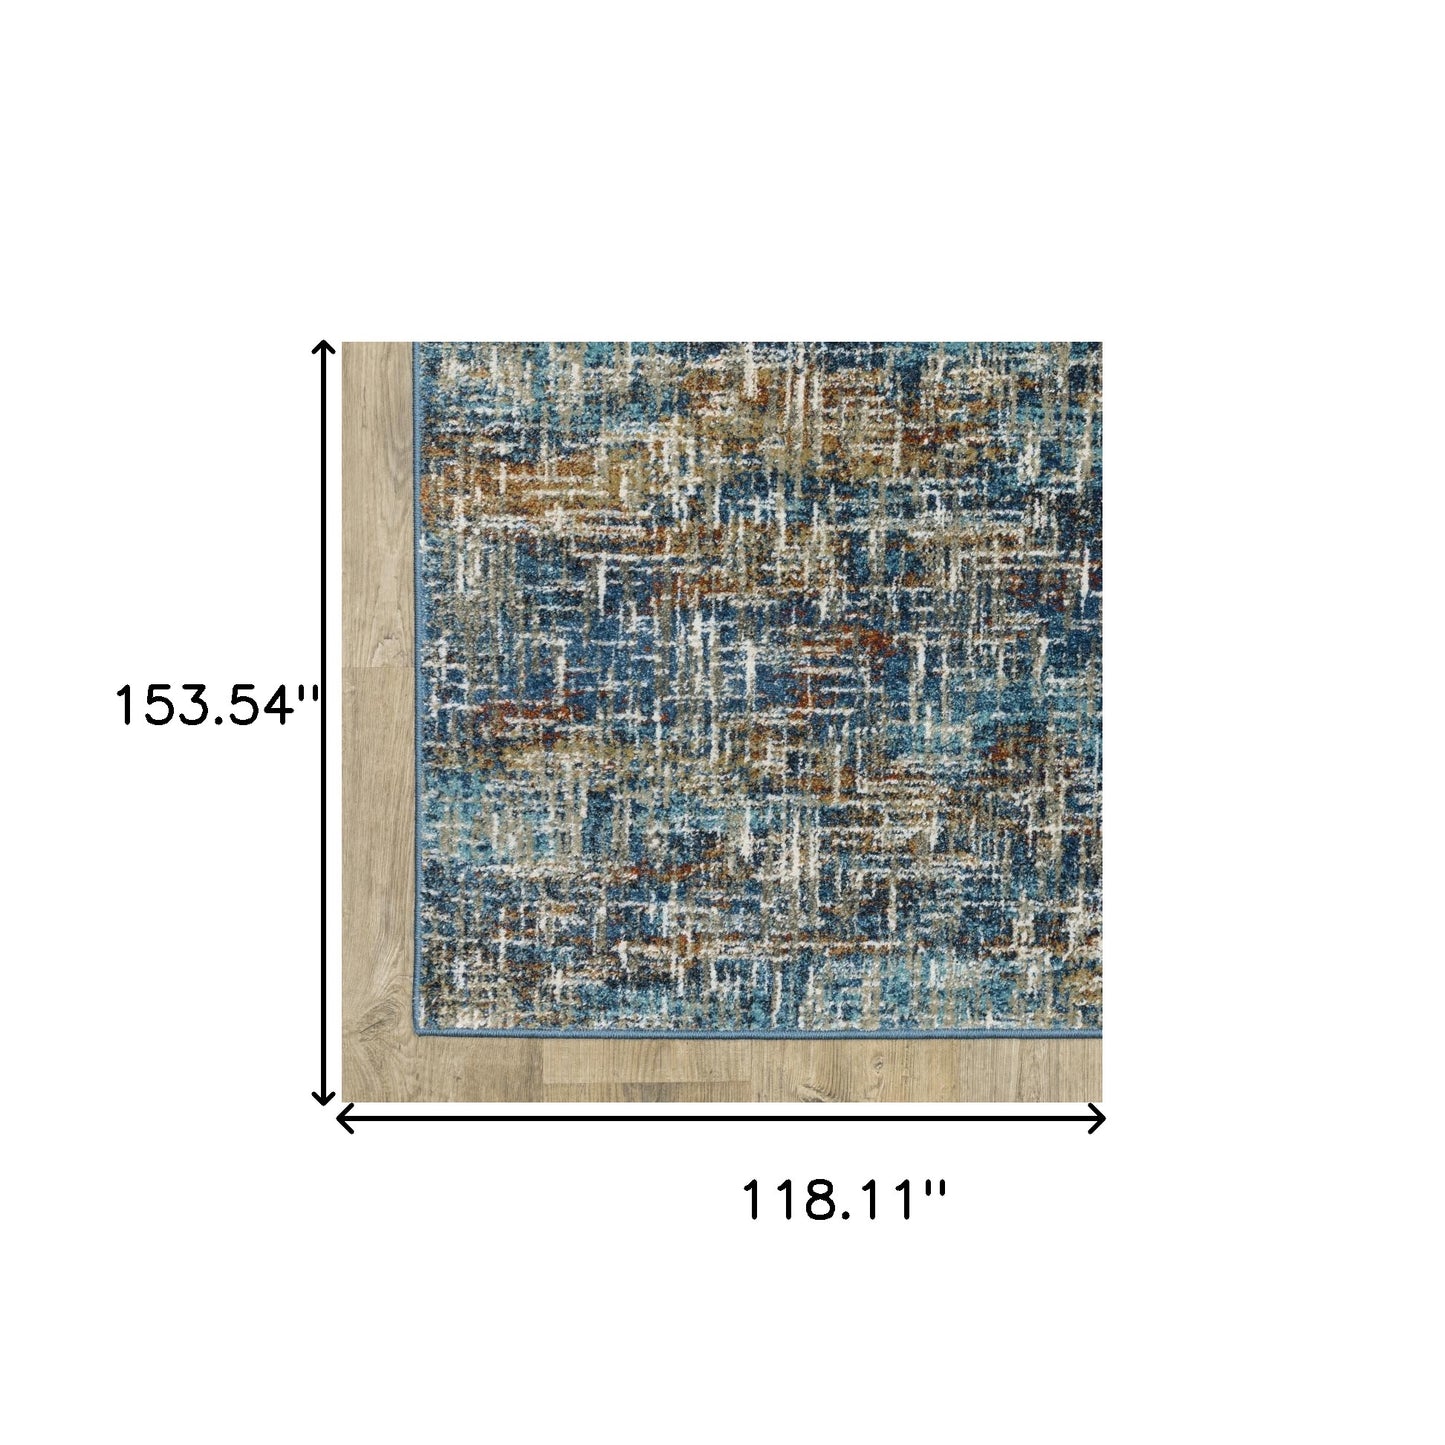 10' X 13' Blue Teal Gold Rust And Beige Abstract Power Loom Stain Resistant Area Rug